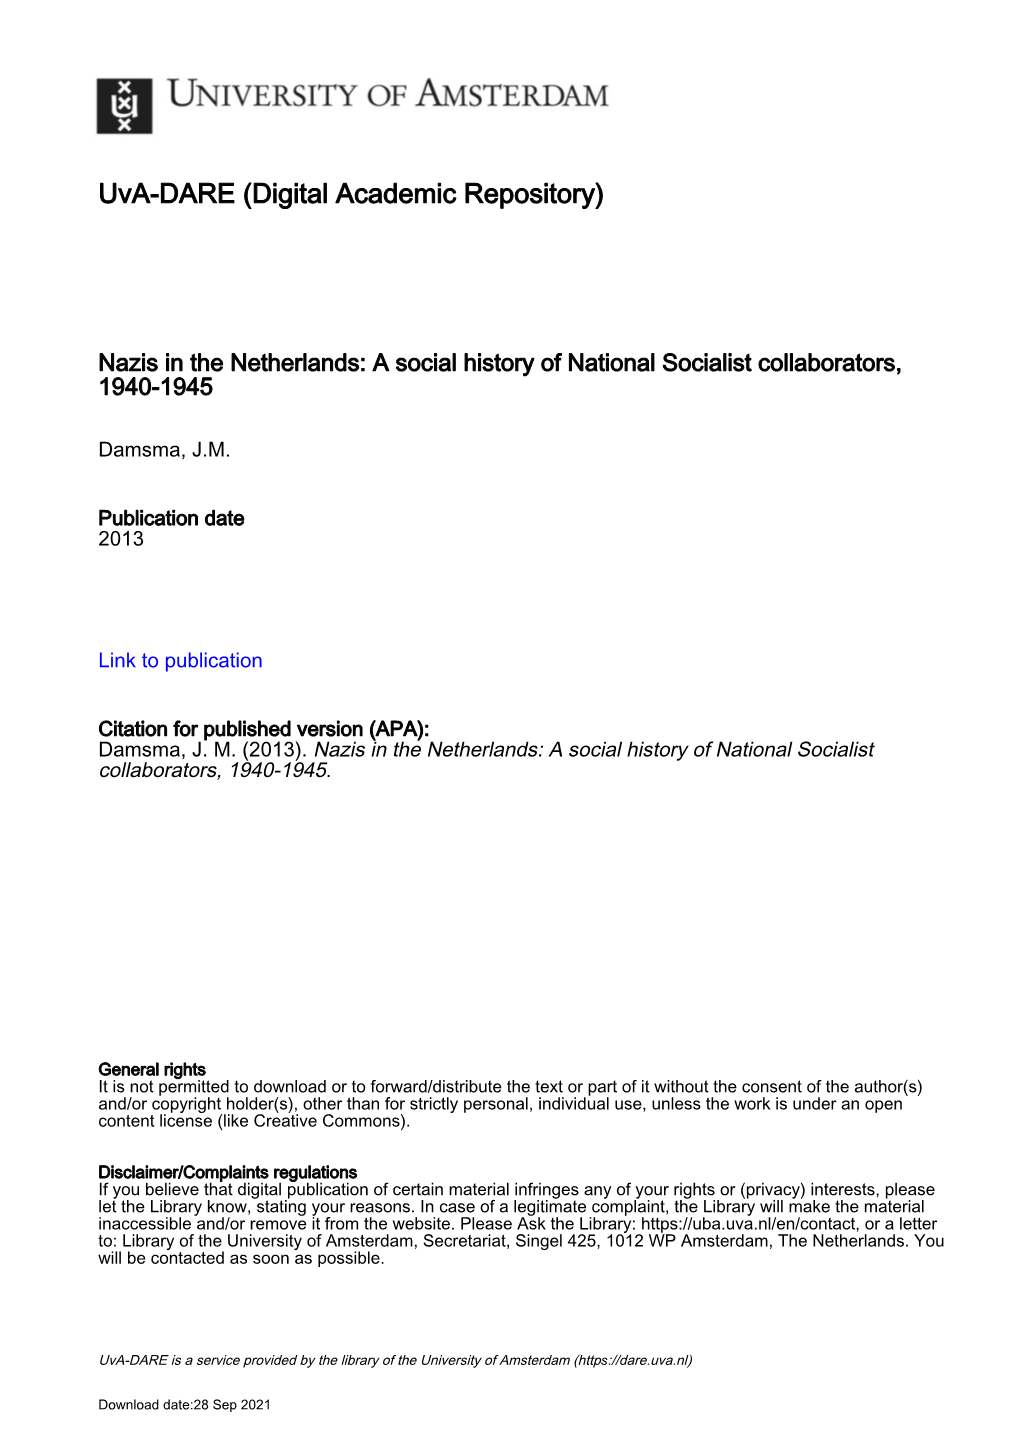 Nazis in the Netherlands: a Social History of National Socialist Collaborators, 1940-1945